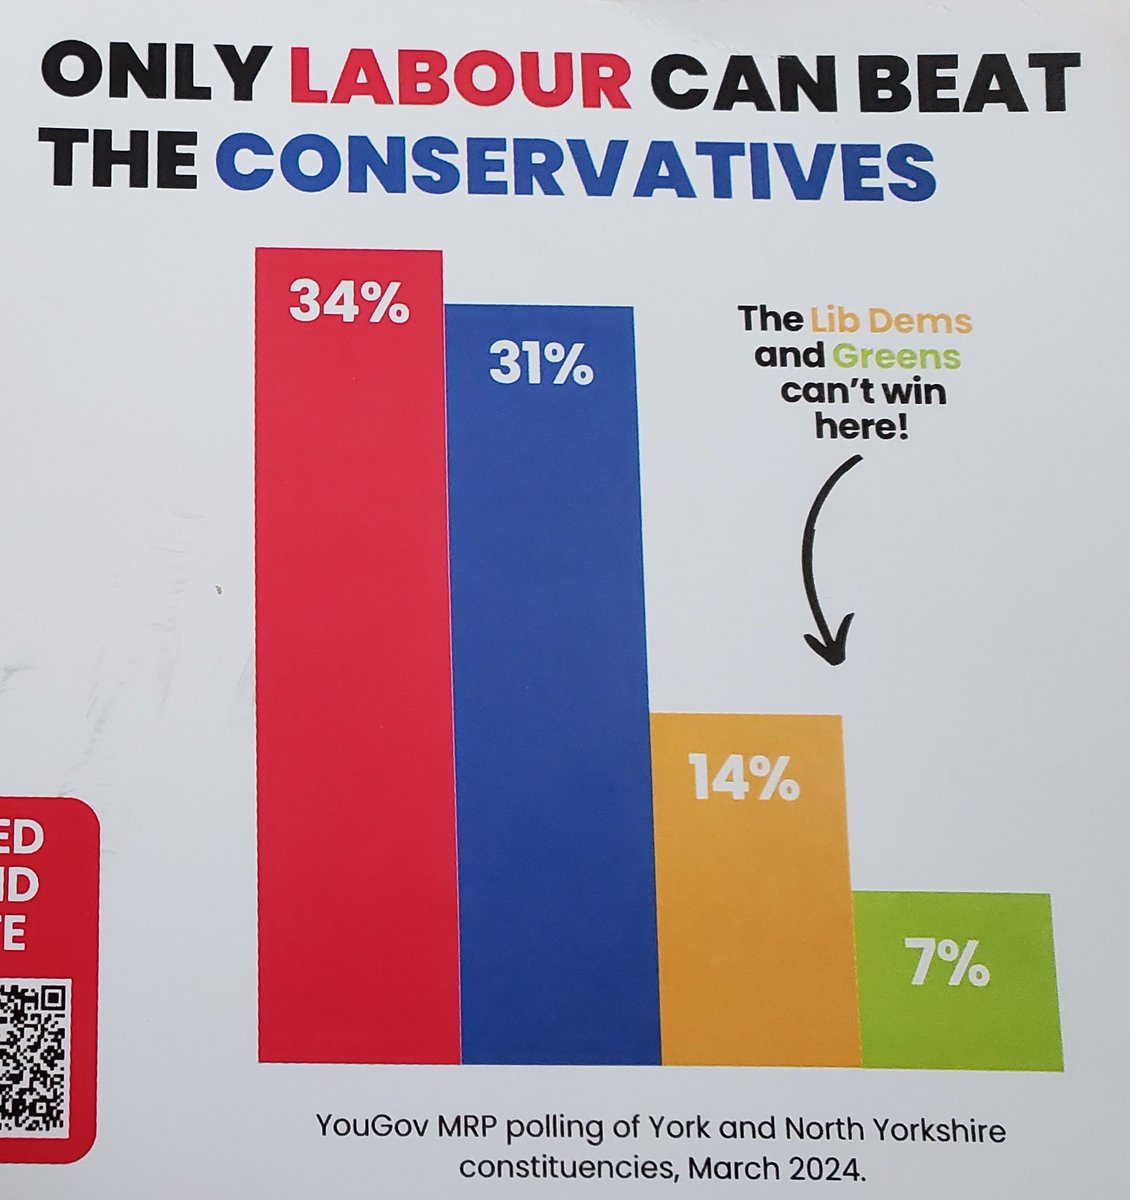 There's only one way to beat the Conservatives in York and North Yorkshire. Vote Labour. A vote for any other candidate is a wasted vote.